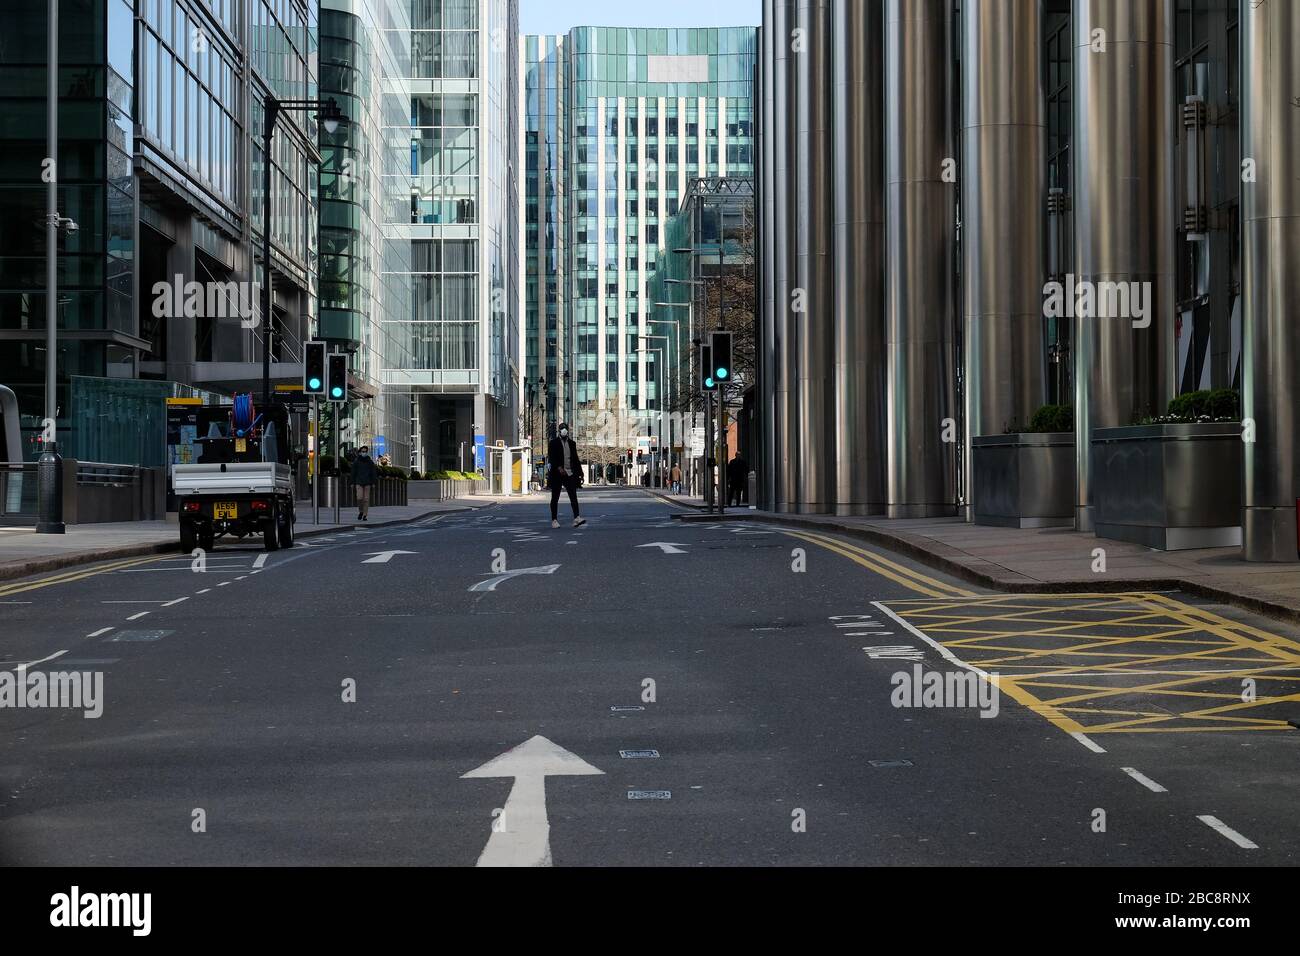 London UK 03 April 2020, Abandoned City in lockdown social distancing at Canary Wharf on a sunny Friday afternoon Credit: Michelle Sadgrove/Alamy Live News Stock Photo